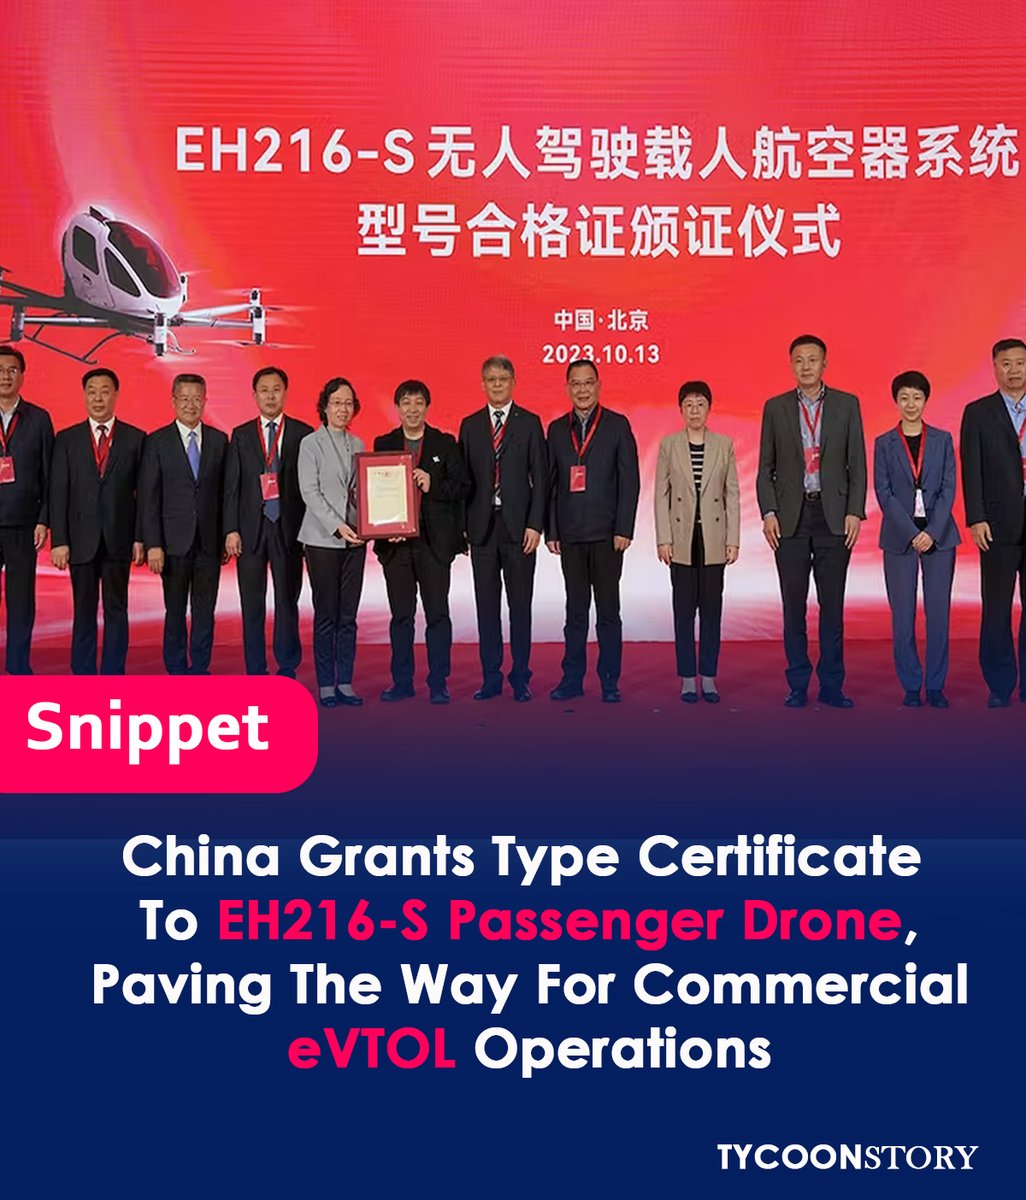 China's Ehang Receives The First Evtol Type Certificate In History.
#EHang #EH216S #PassengerDrone #TypeCertificate #China #AirMobility #UrbanAirMobility #eVTOL #ElectricAircraft #FutureOfFlight #SustainableAviation #AviationInnovation #Aerospace @ElectricVTOL